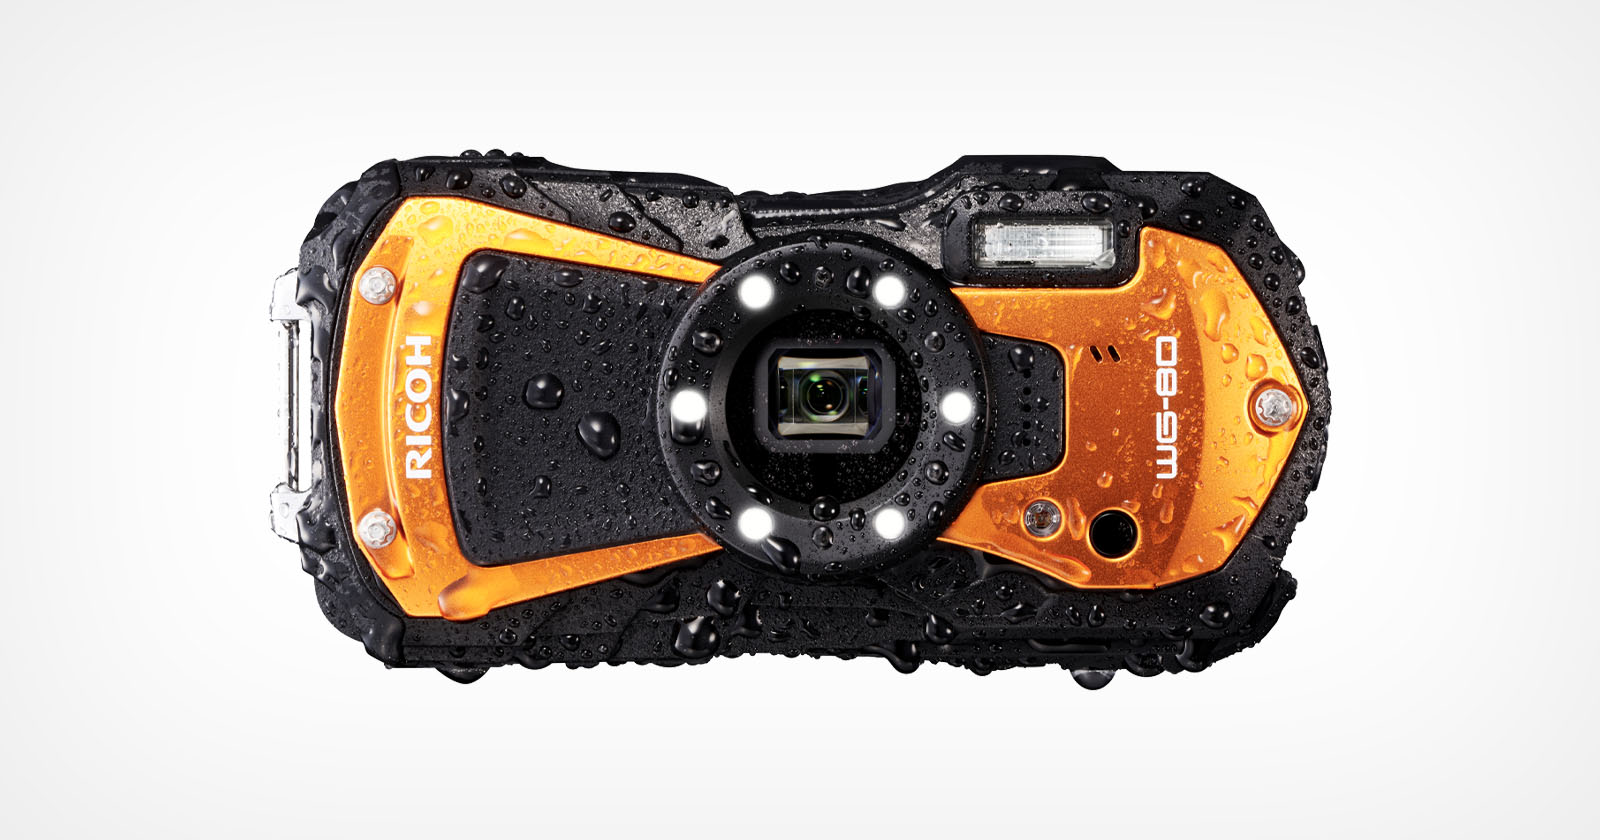 The Ricoh WG-80 is an Ultra-Rugged Point-and-Shoot with Built-in Lights